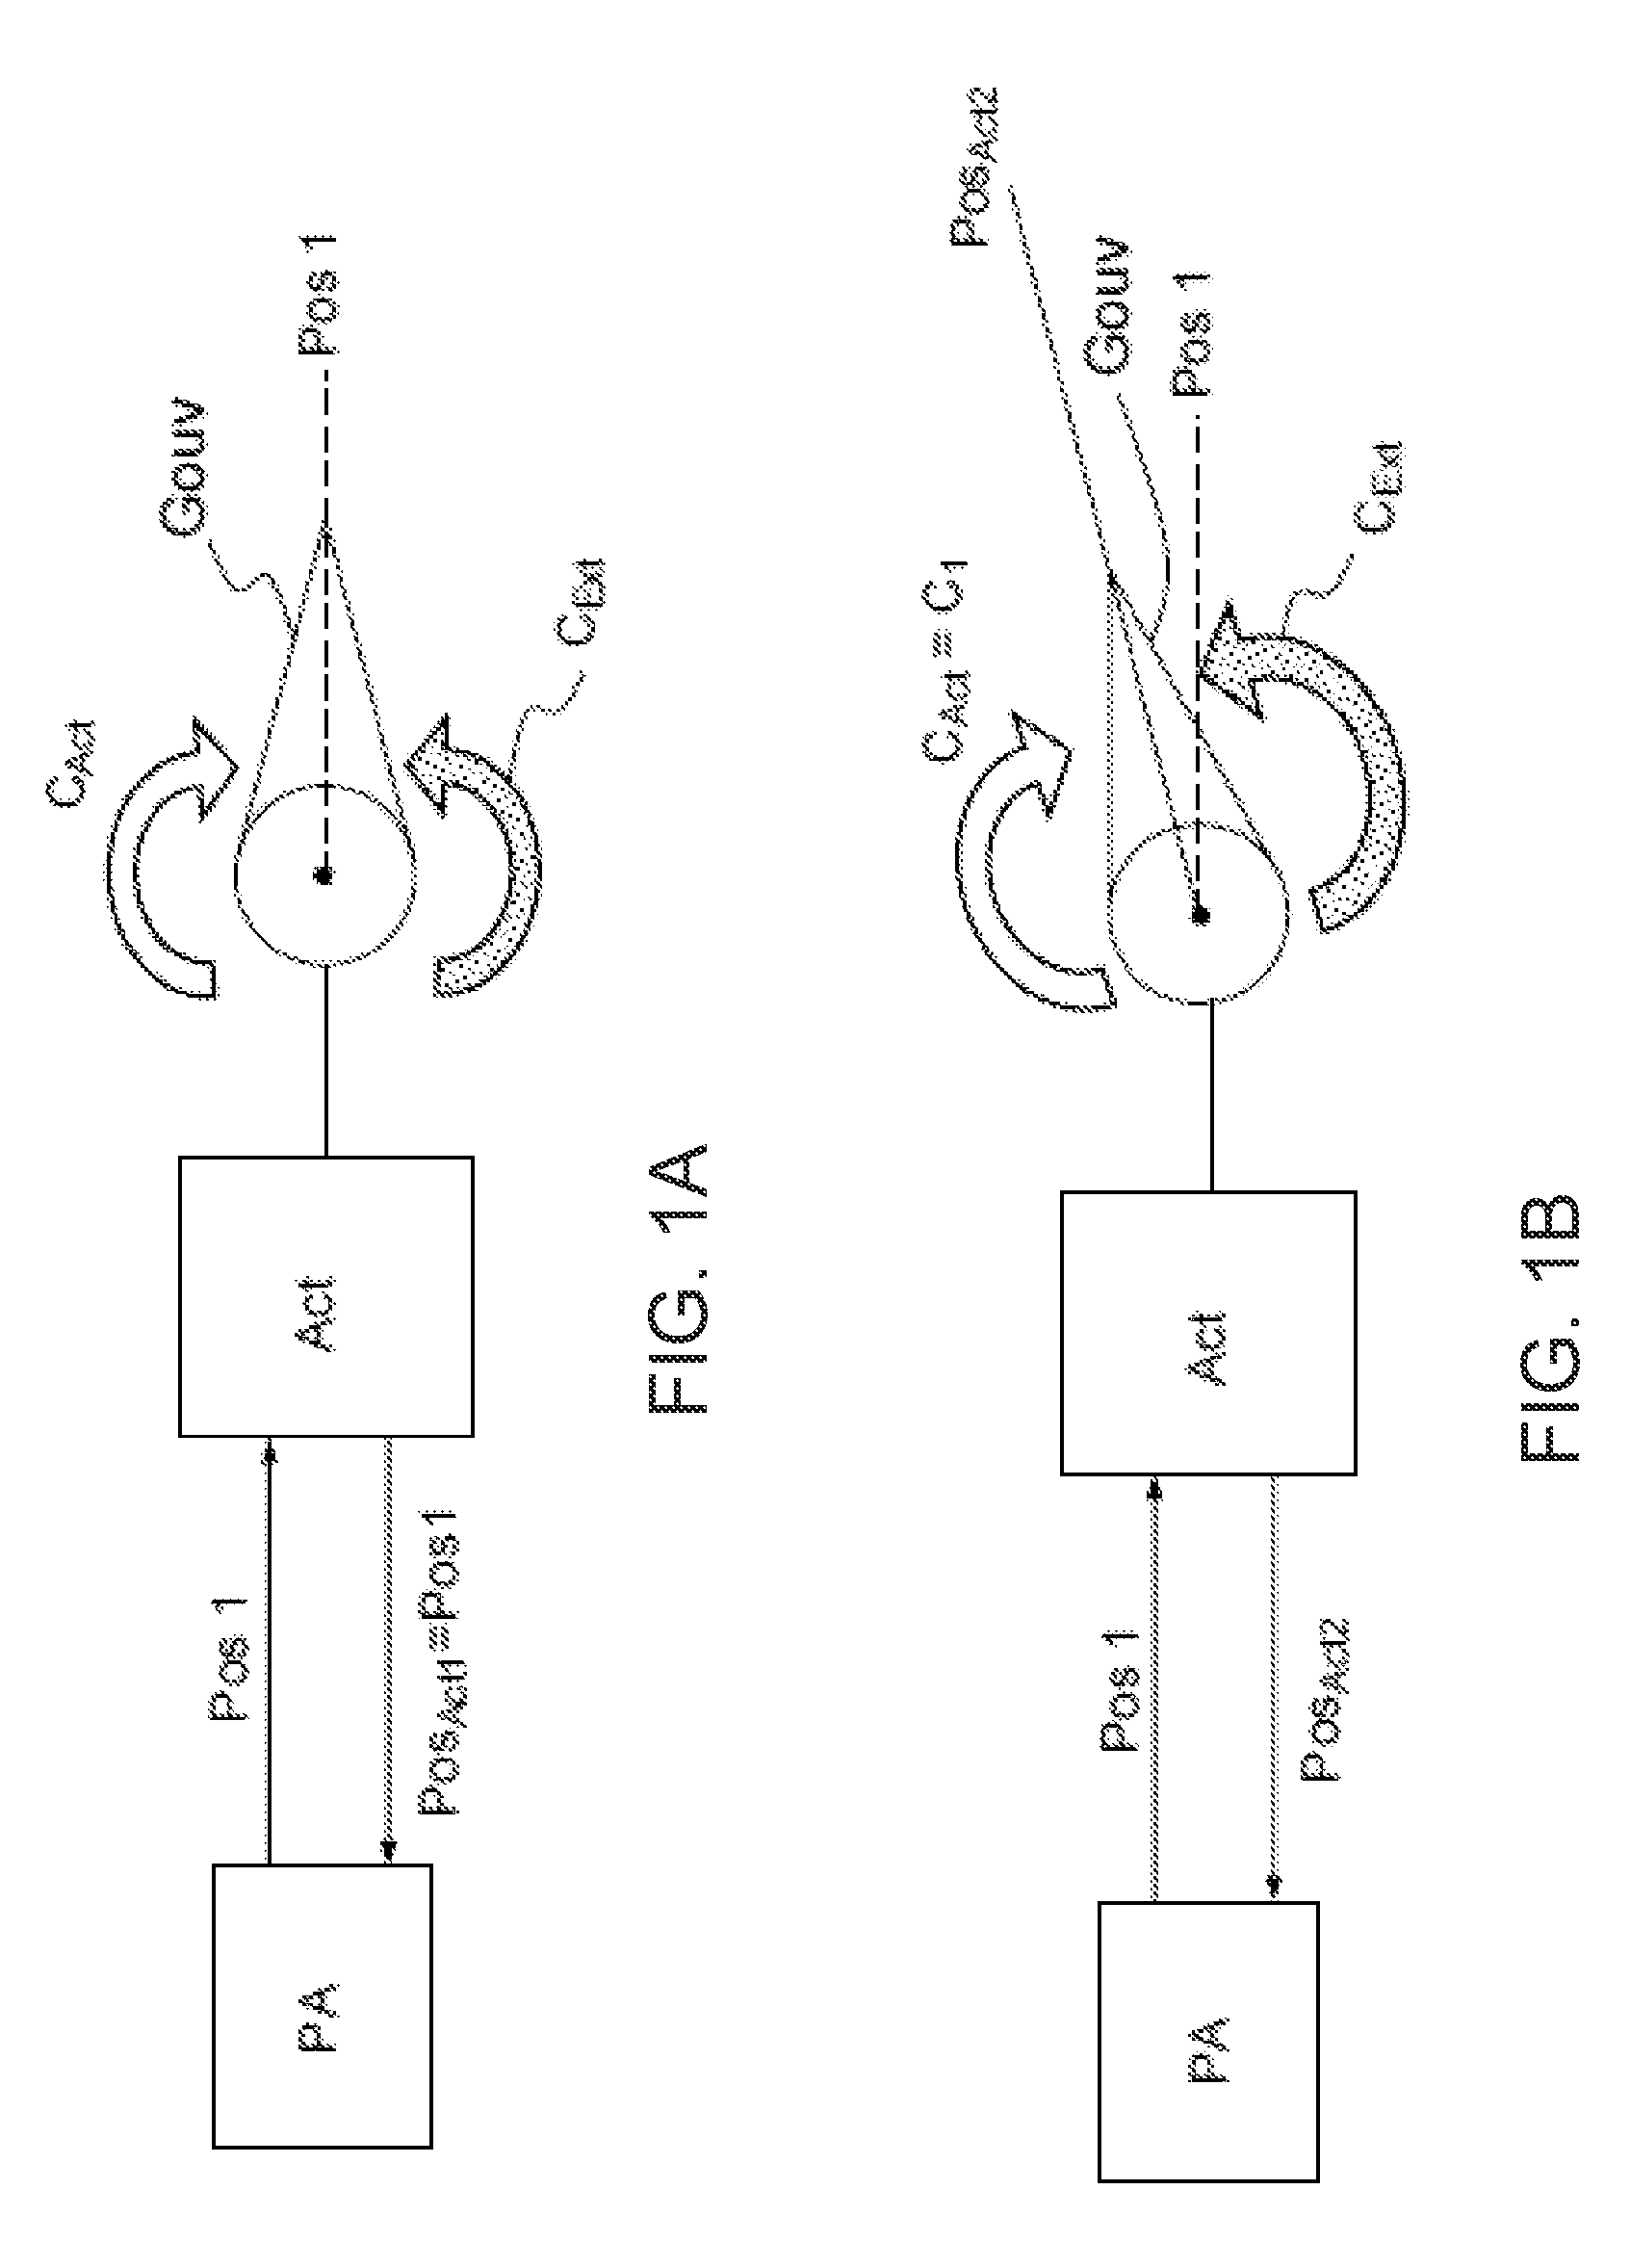 Method for regulating the torque of a control surface actuator with a controlled angular position on an aircraft with mechanical flight control